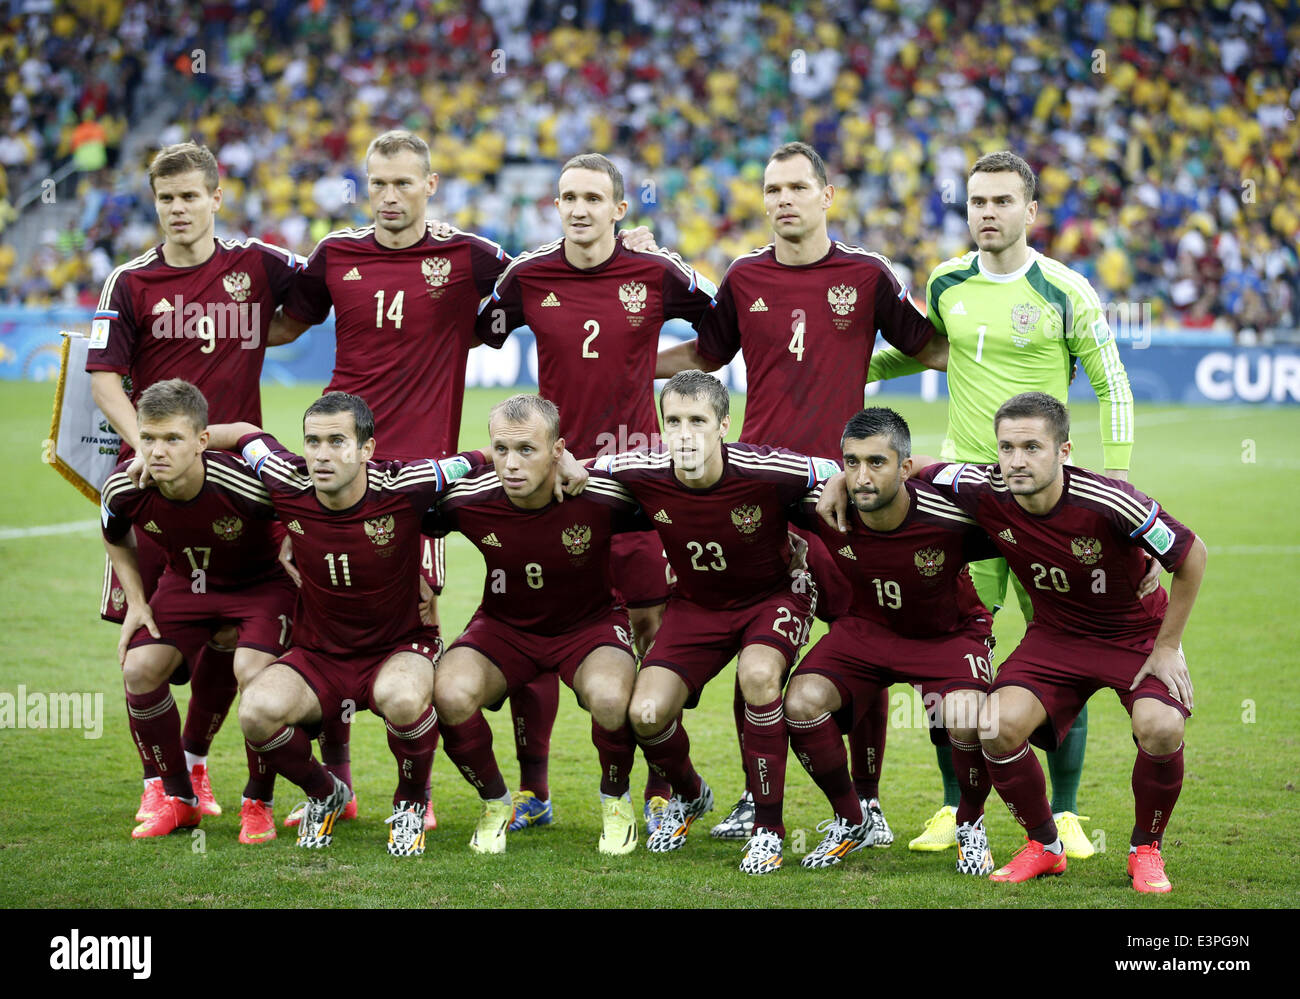 (140626) -- CURITIBA, June 26, 2014 (Xinhua) -- Russia's players pose for a group photo during a Group H match between Algeria and Russia of 2014 FIFA World Cup at the Arena da Baixada Stadium in Curitiba, Brazil, June 26, 2014. (Xinhua/Liao Yujie) Stock Photo